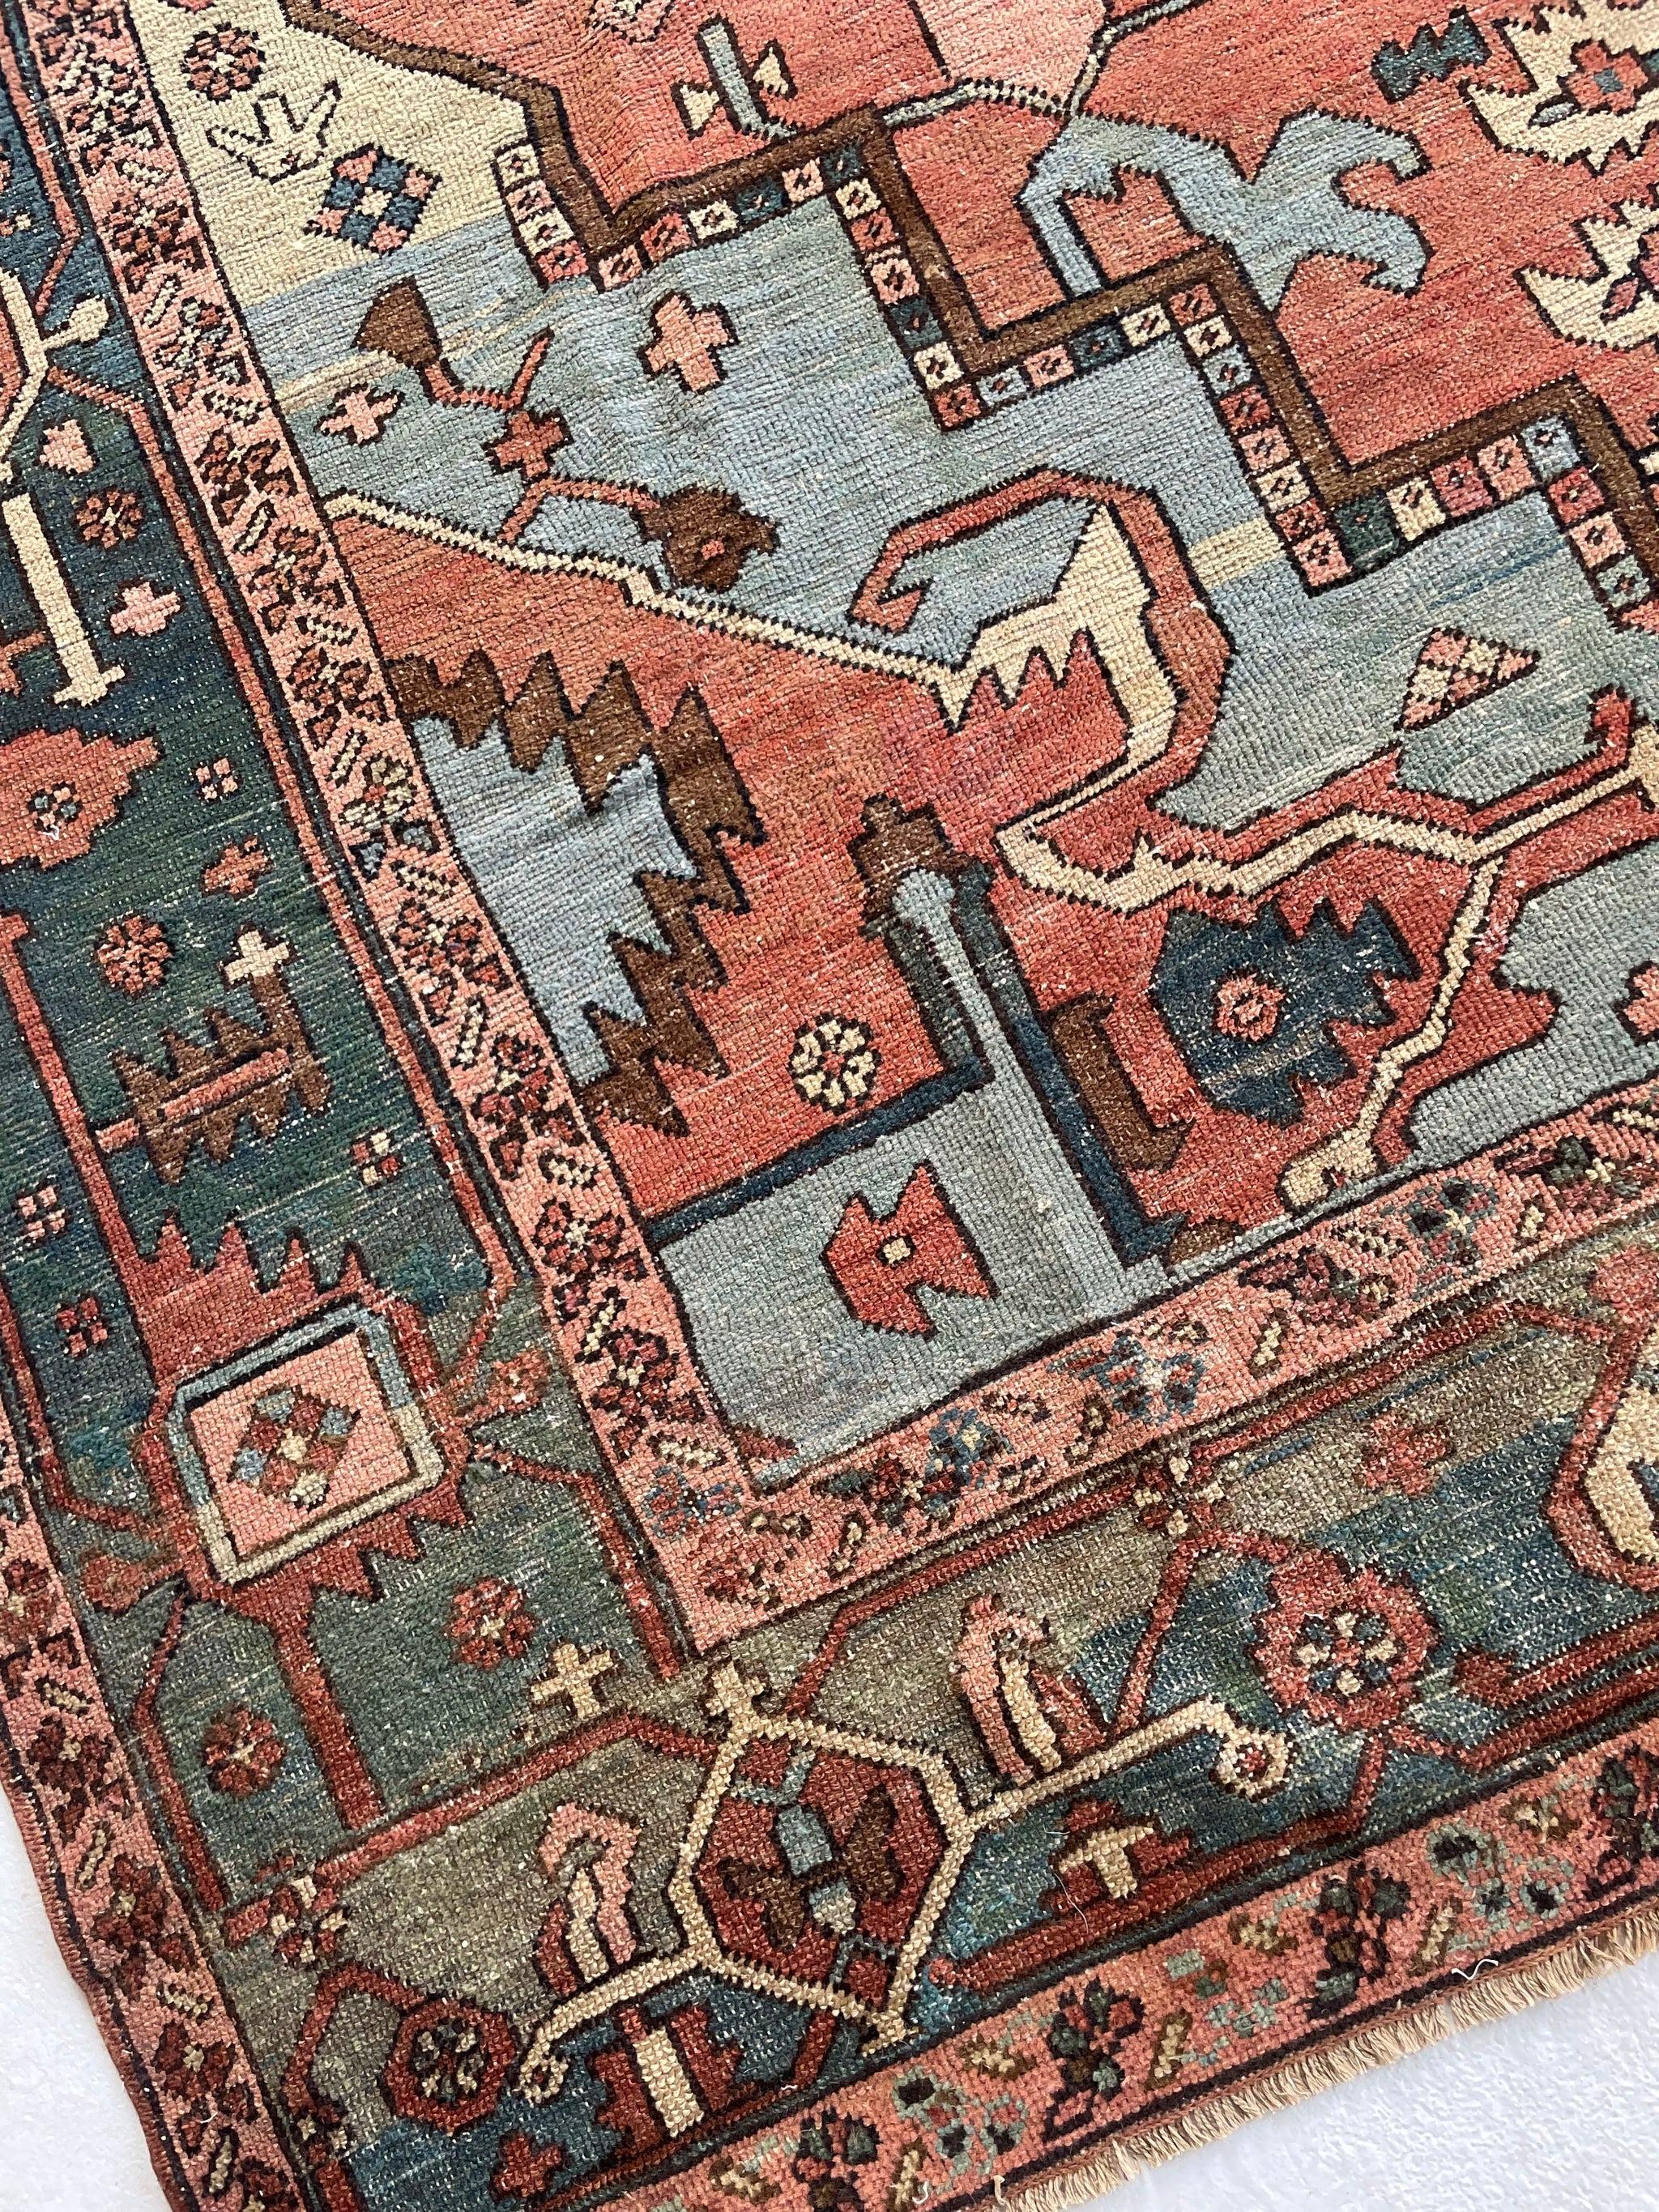 Hand-Knotted Antique Persian Green And Terracotta Serapi Carpet Rug, circa 1880-1900's For Sale